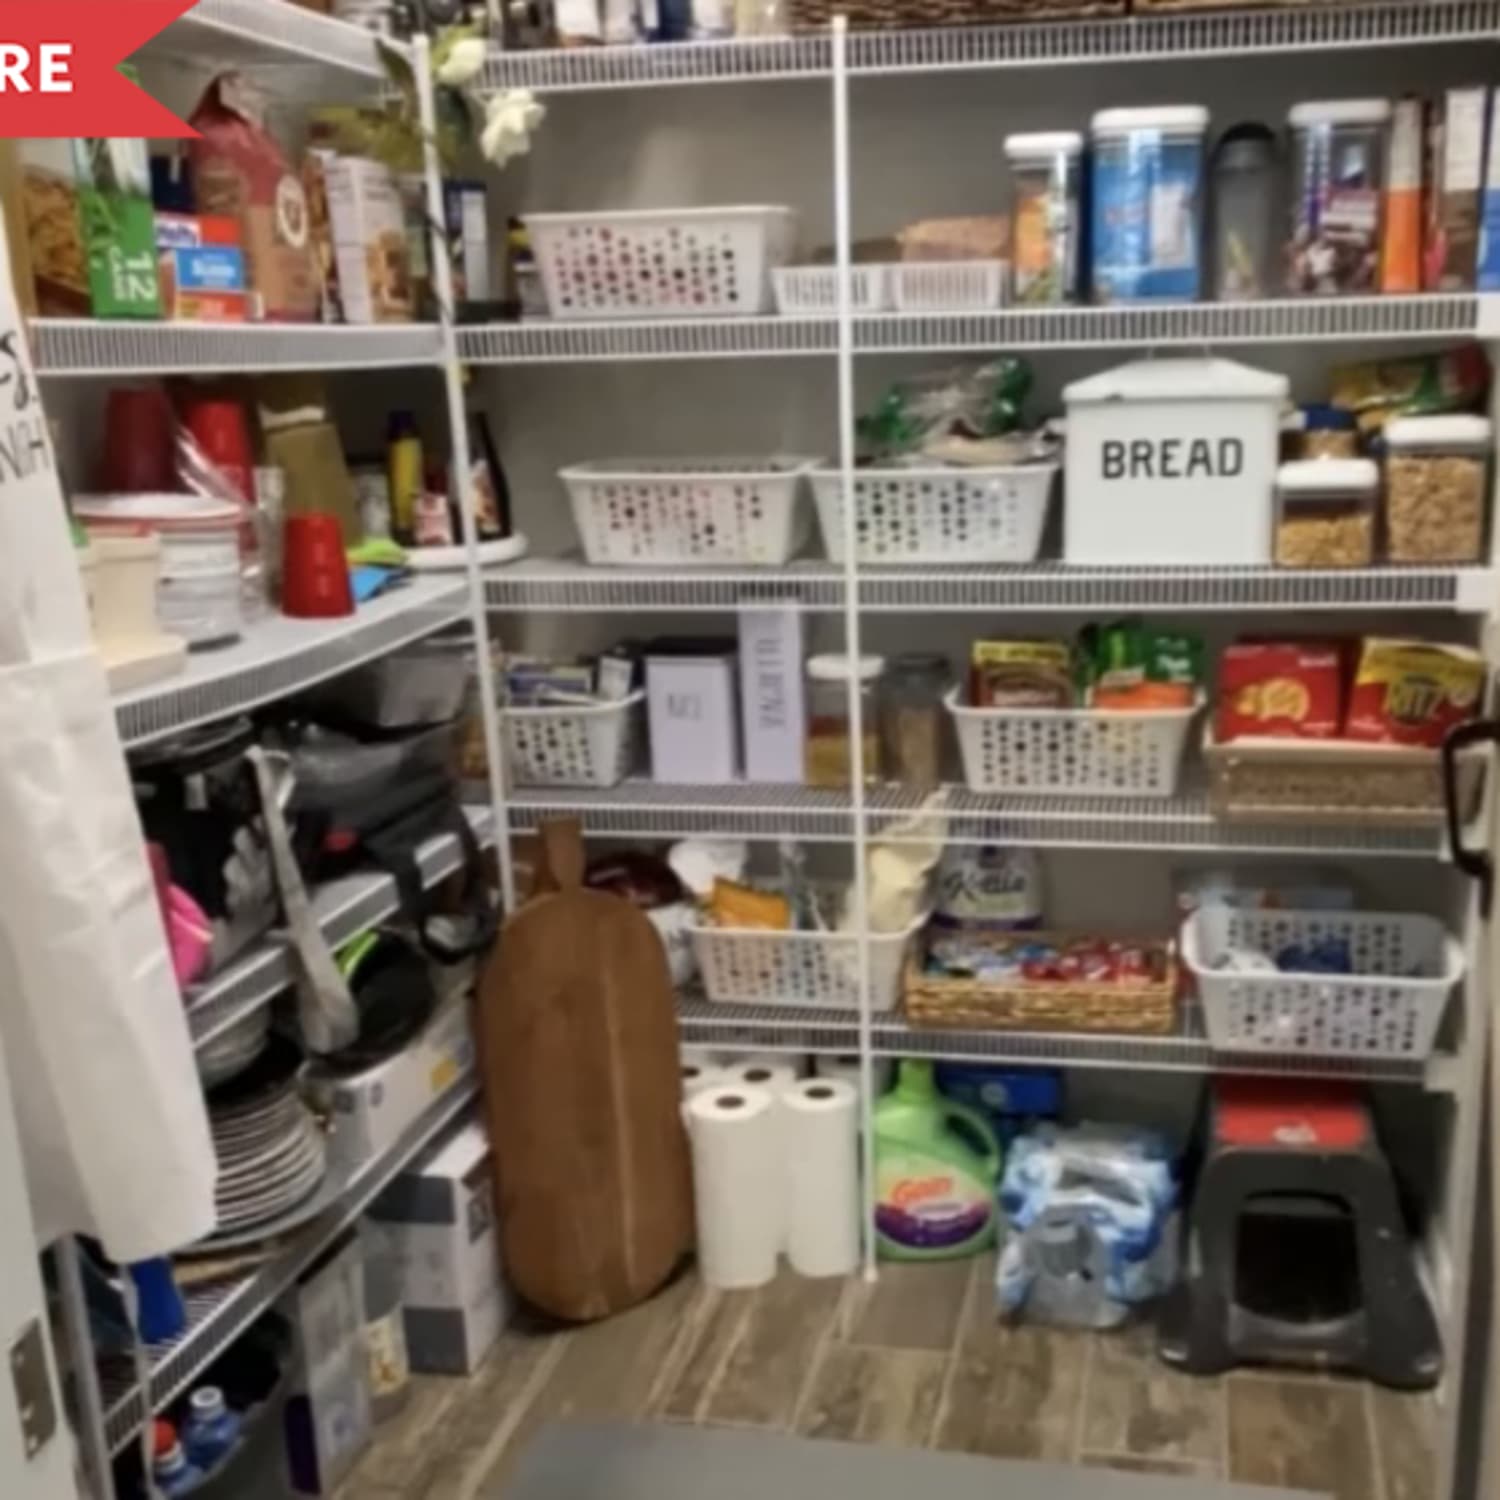 How to Organize a Pantry With Wire Shelves - Declutter in Minutes